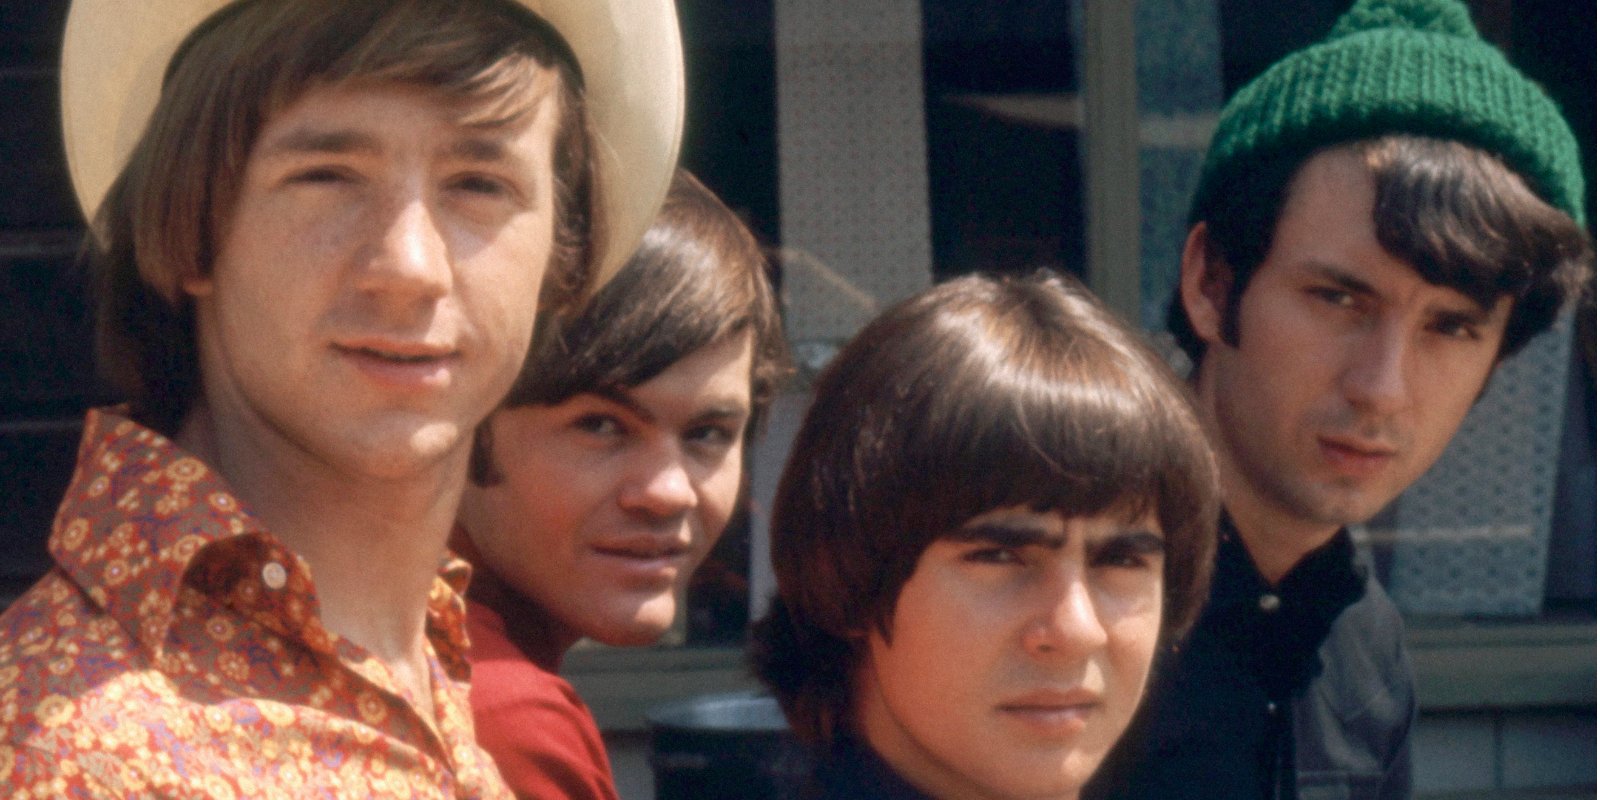 Mike Nesmith Had a Texas Street Named After Him, Long Before Finding Fame With The Monkees